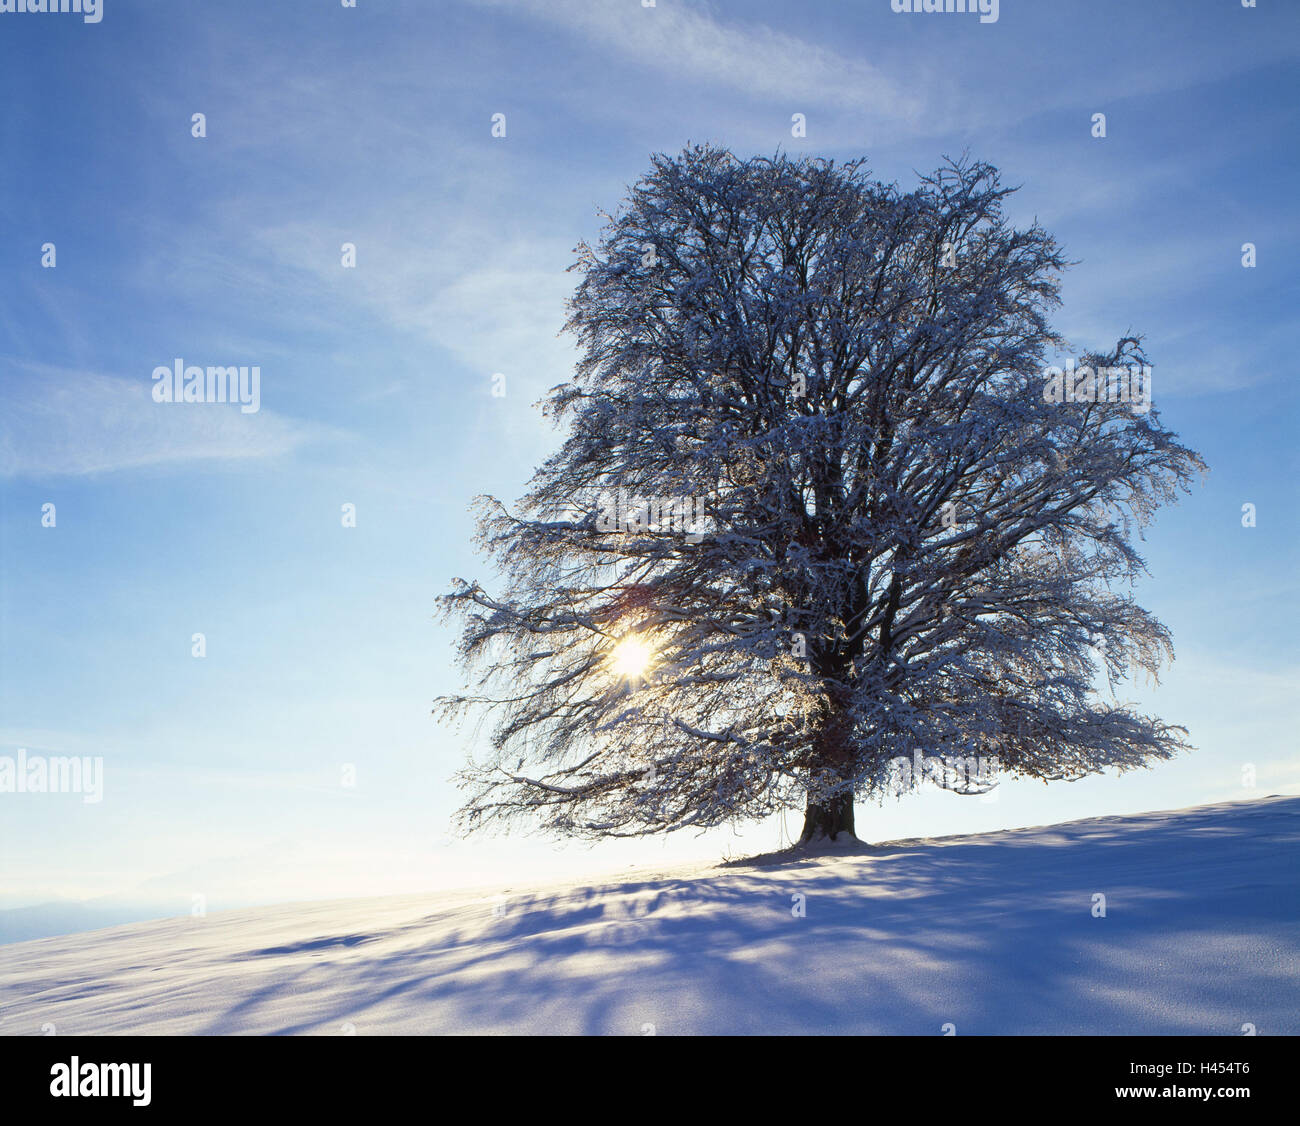 Copper beech, Fagus sylvatica, snow-covered, back light, leafless, winter scenery, scenery, tree, white, snow, frost, season, cold, broad-leaved tree, book, nature, snowy, snow scenery, mood, time of day, winter, the sun, Stock Photo